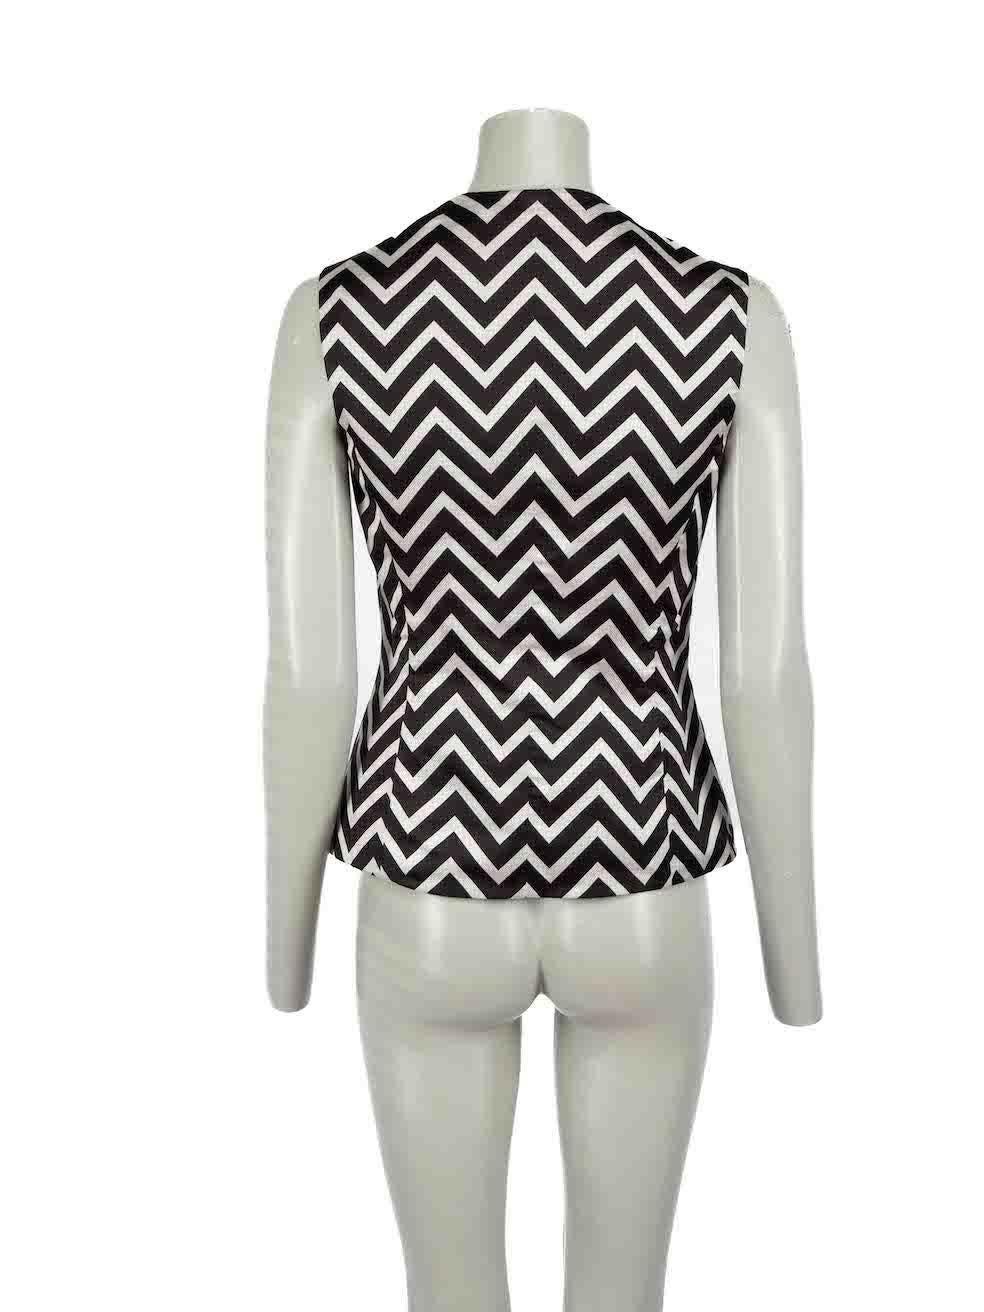 Gianfranco Ferré Vintage Zigzag Silk Jacquard Waistcoat Size S In Excellent Condition In London, GB